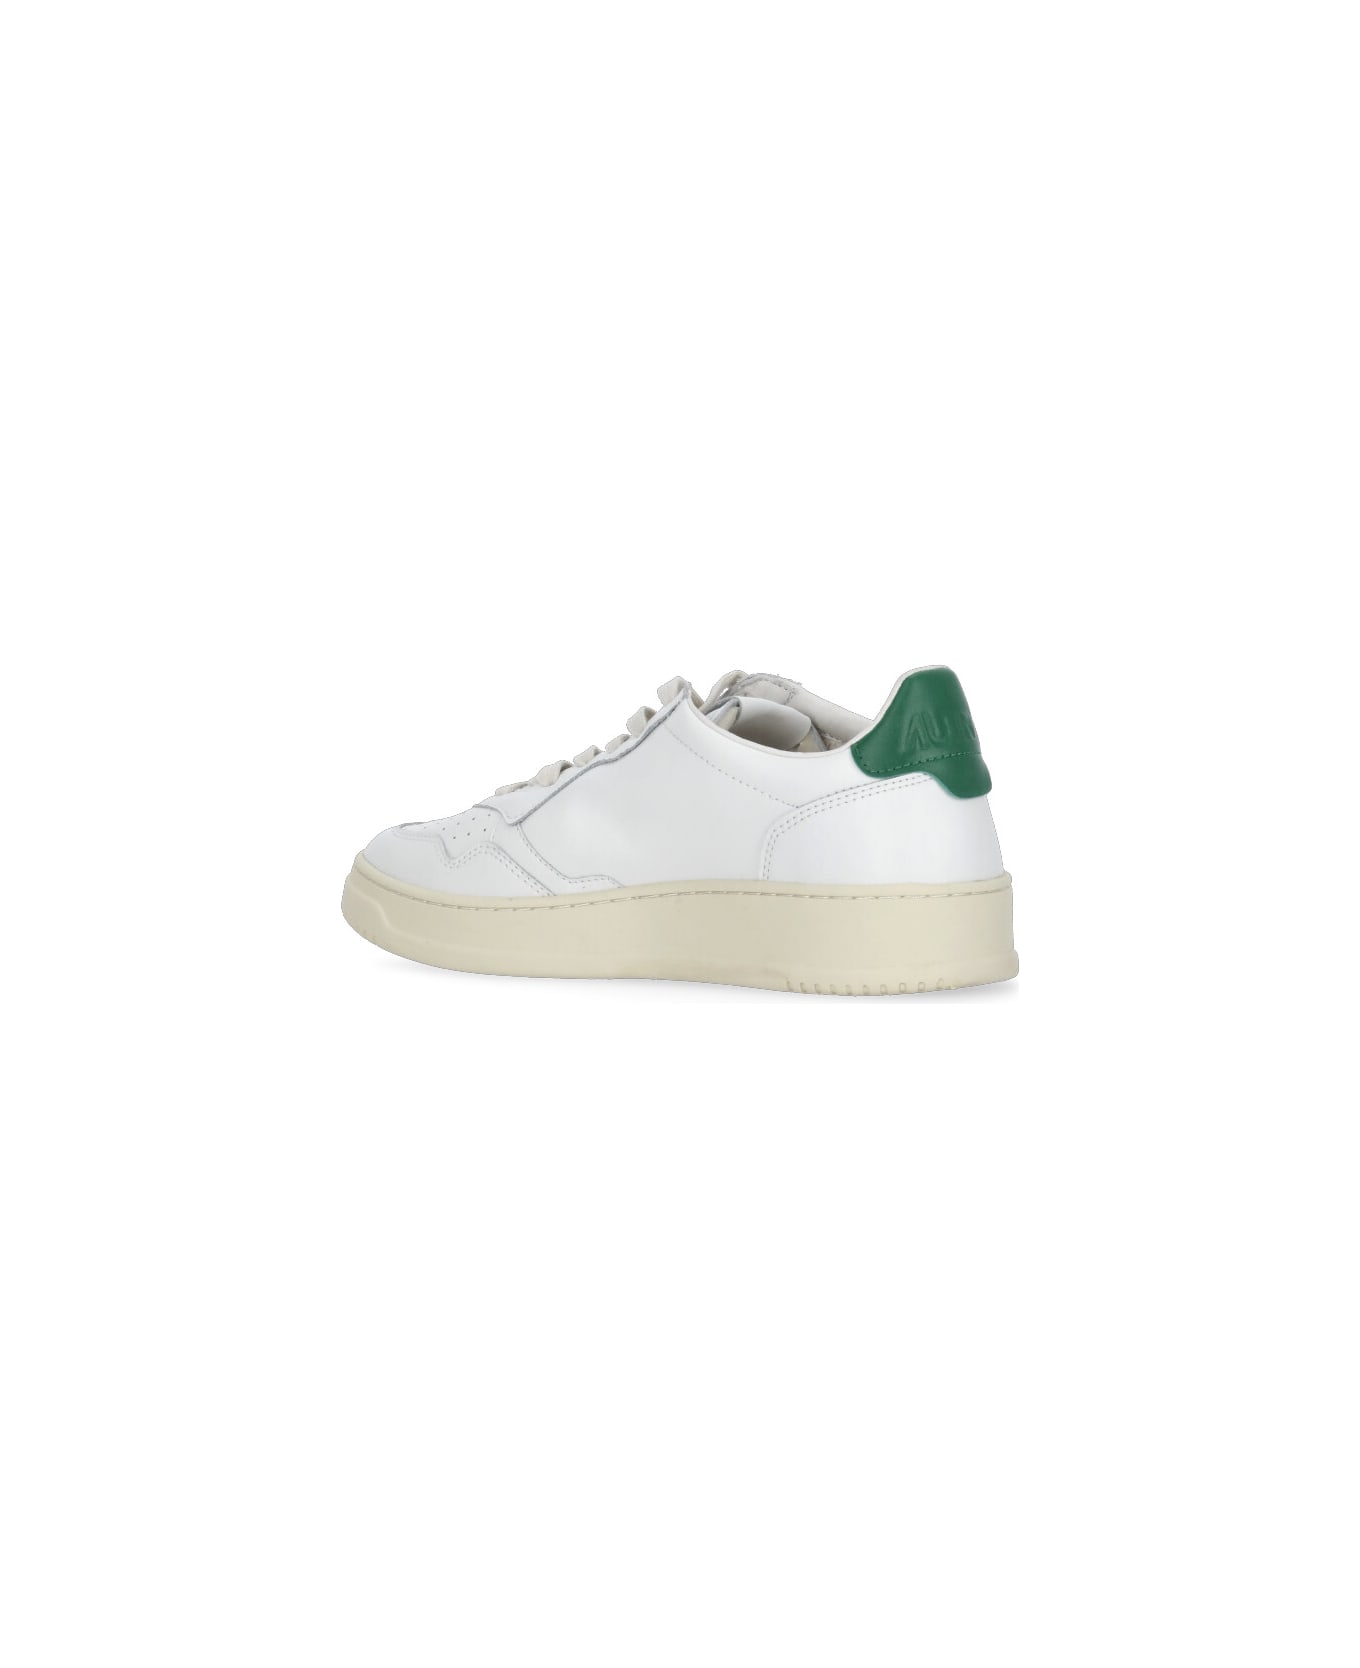 Autry Aulm Ll20 Sneakers - White スニーカー